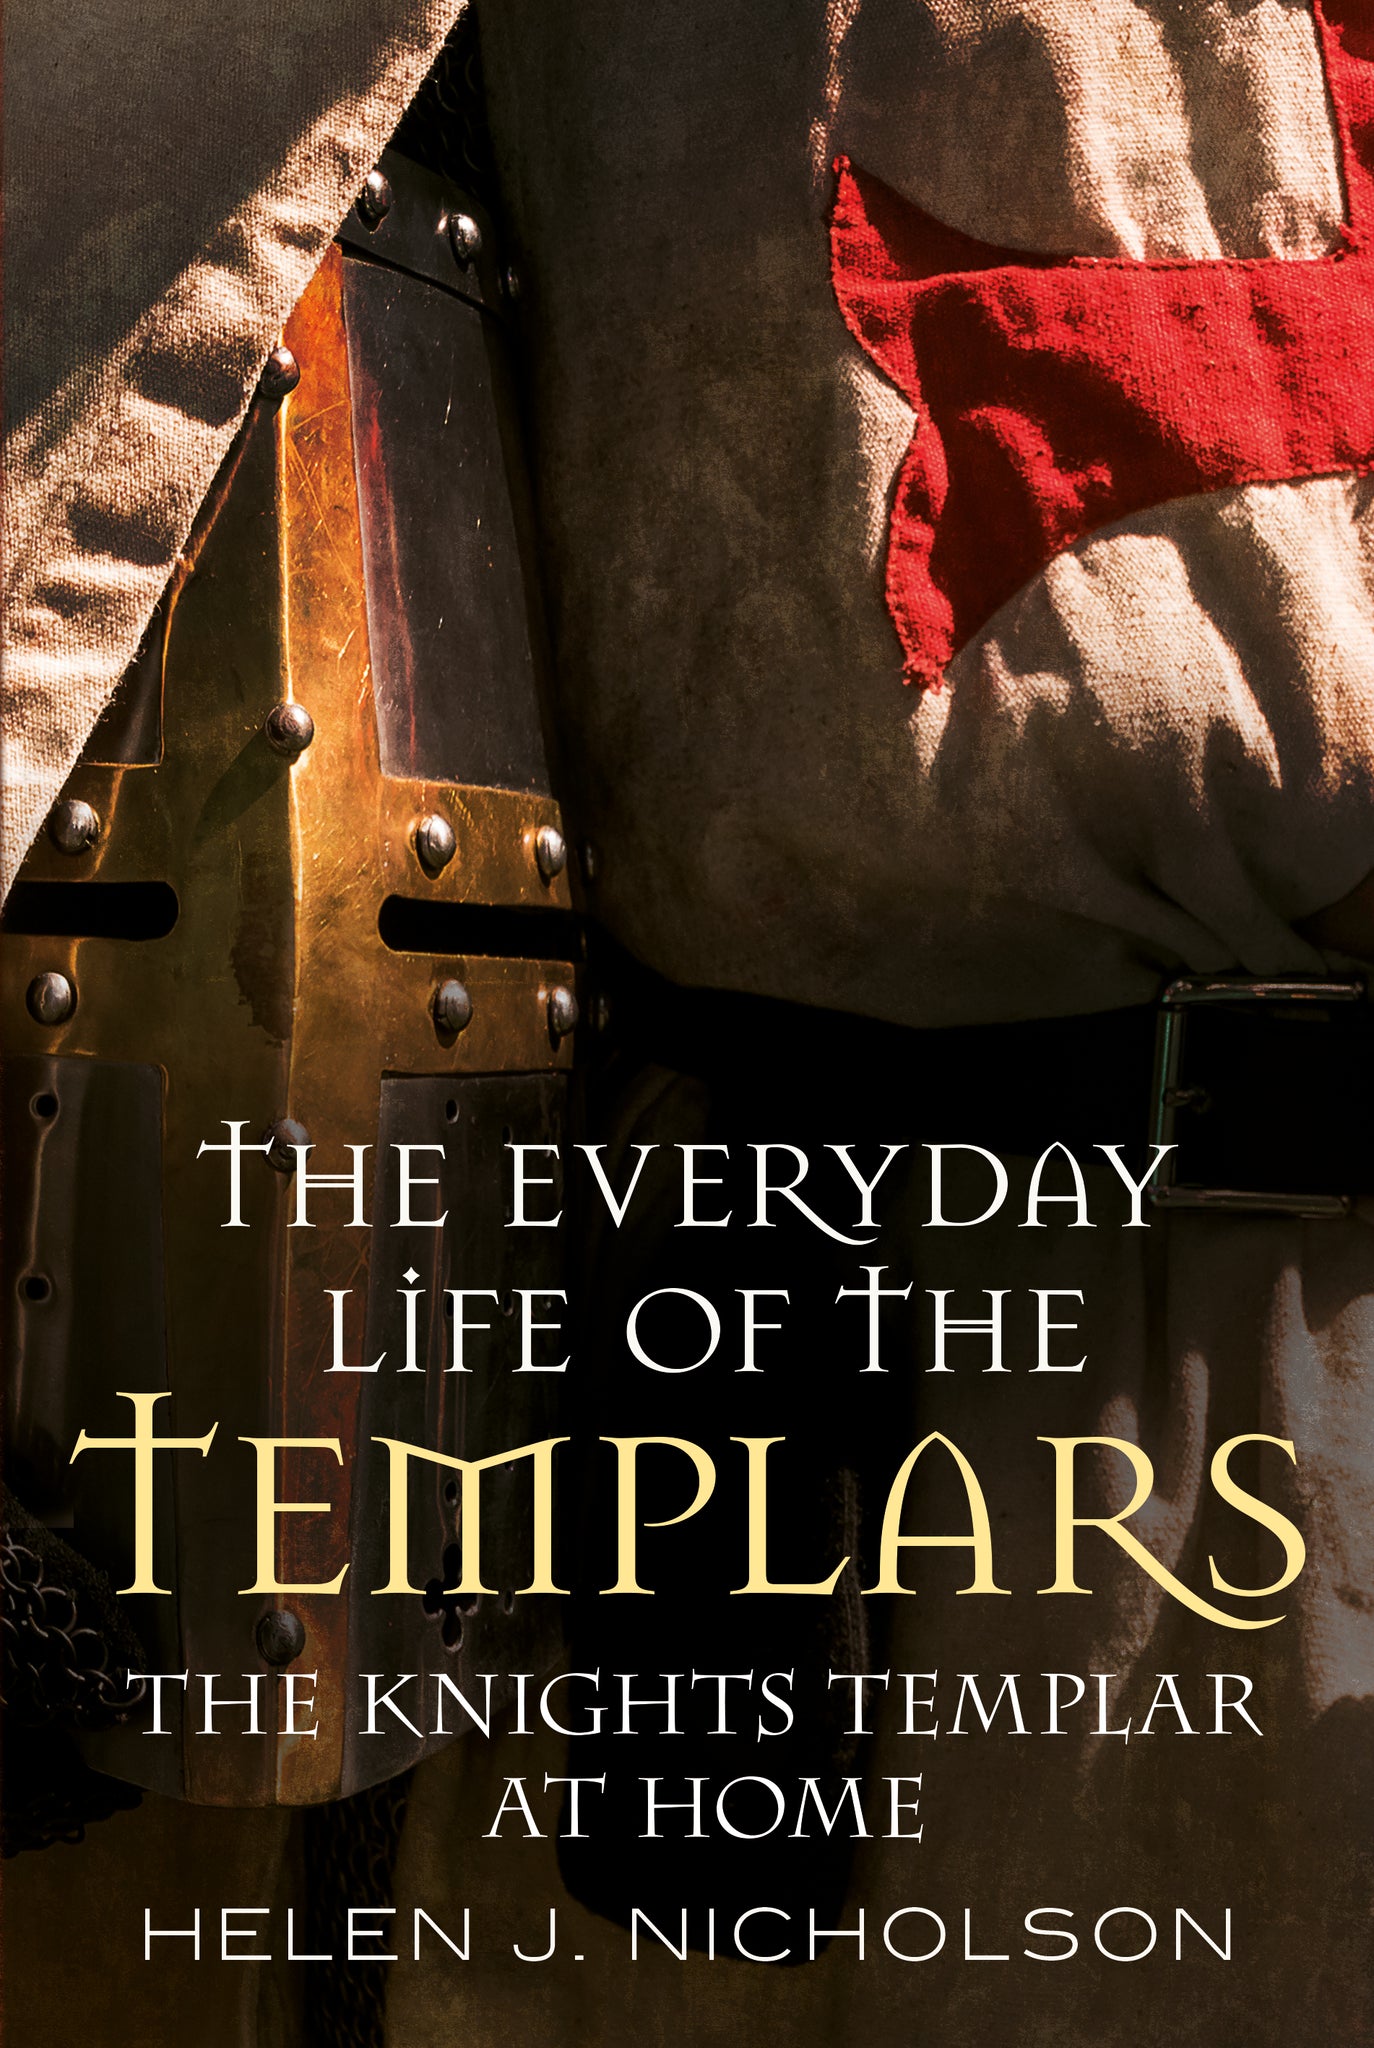 The Everyday Life of the Templars: The Knights Templar at Home